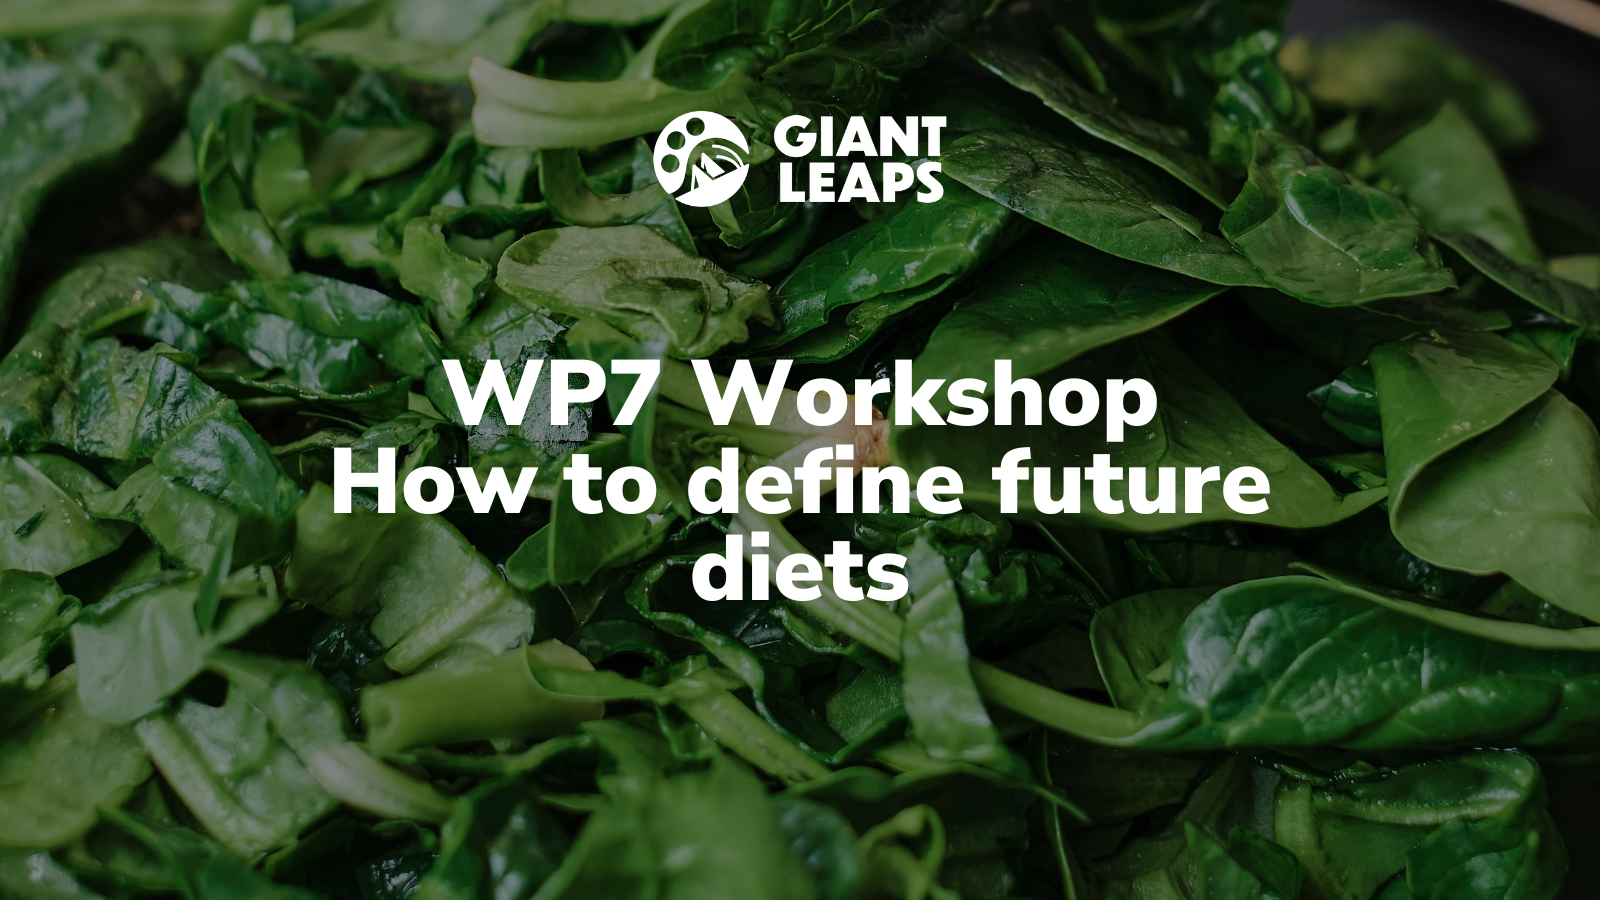 WP7 Workshop: How to define future diets